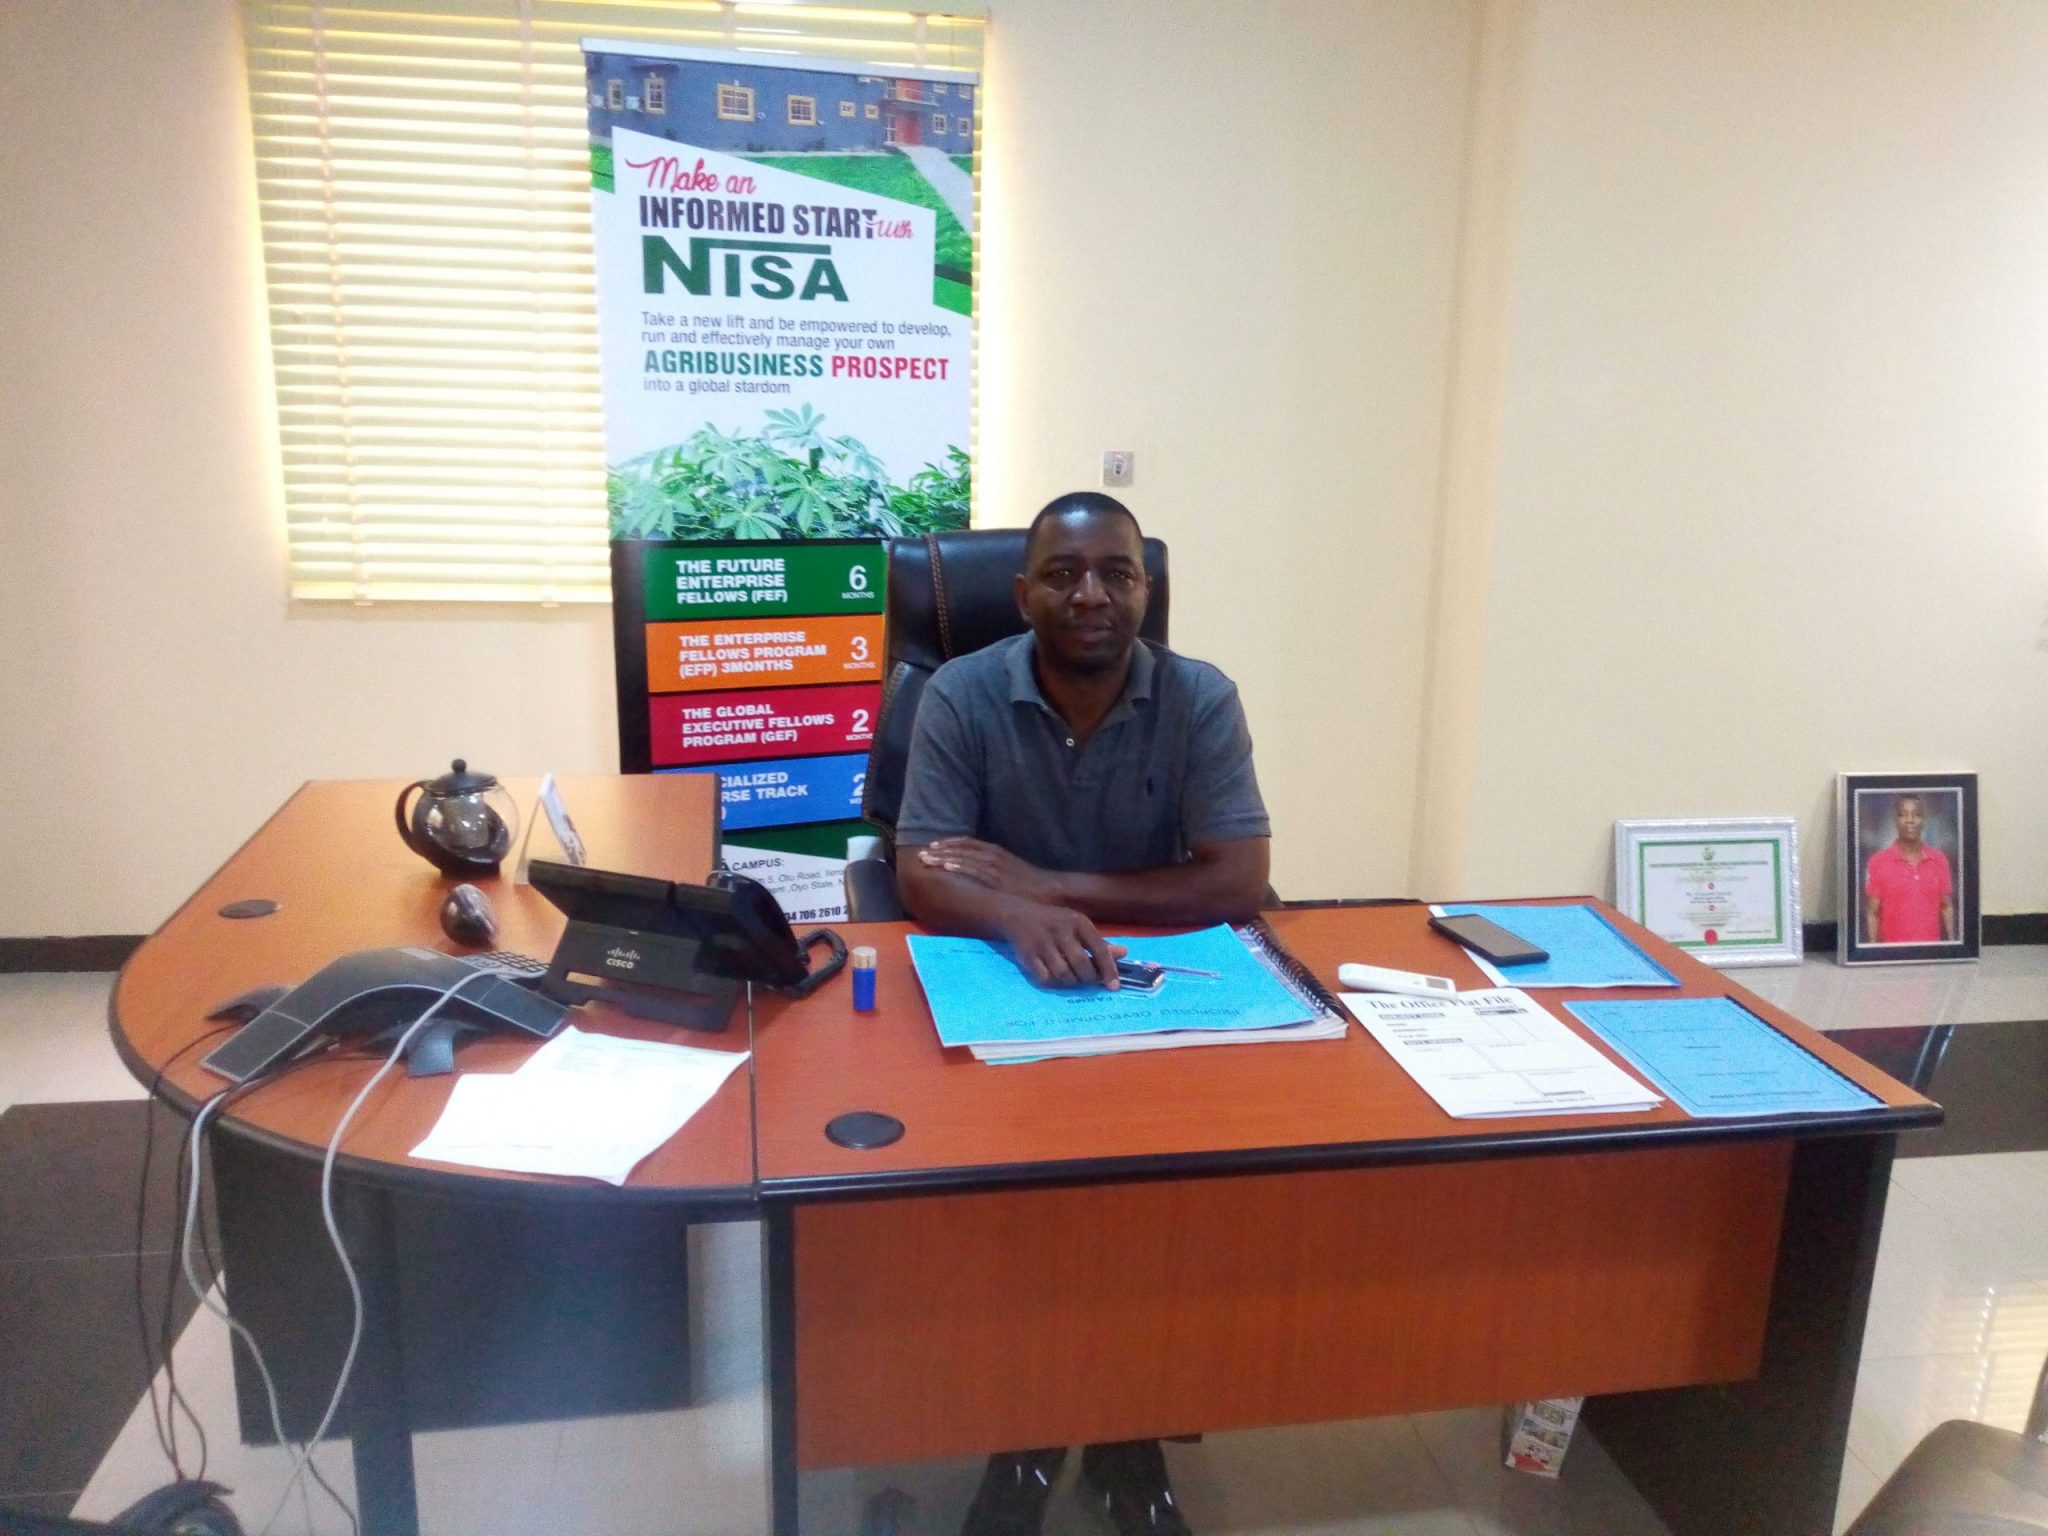 OVER 50 MILLION JOBS CAN BE CREATED THROUGH AGRICULTURE IN NIGERIA: -KOLAWOLE ADENIJI